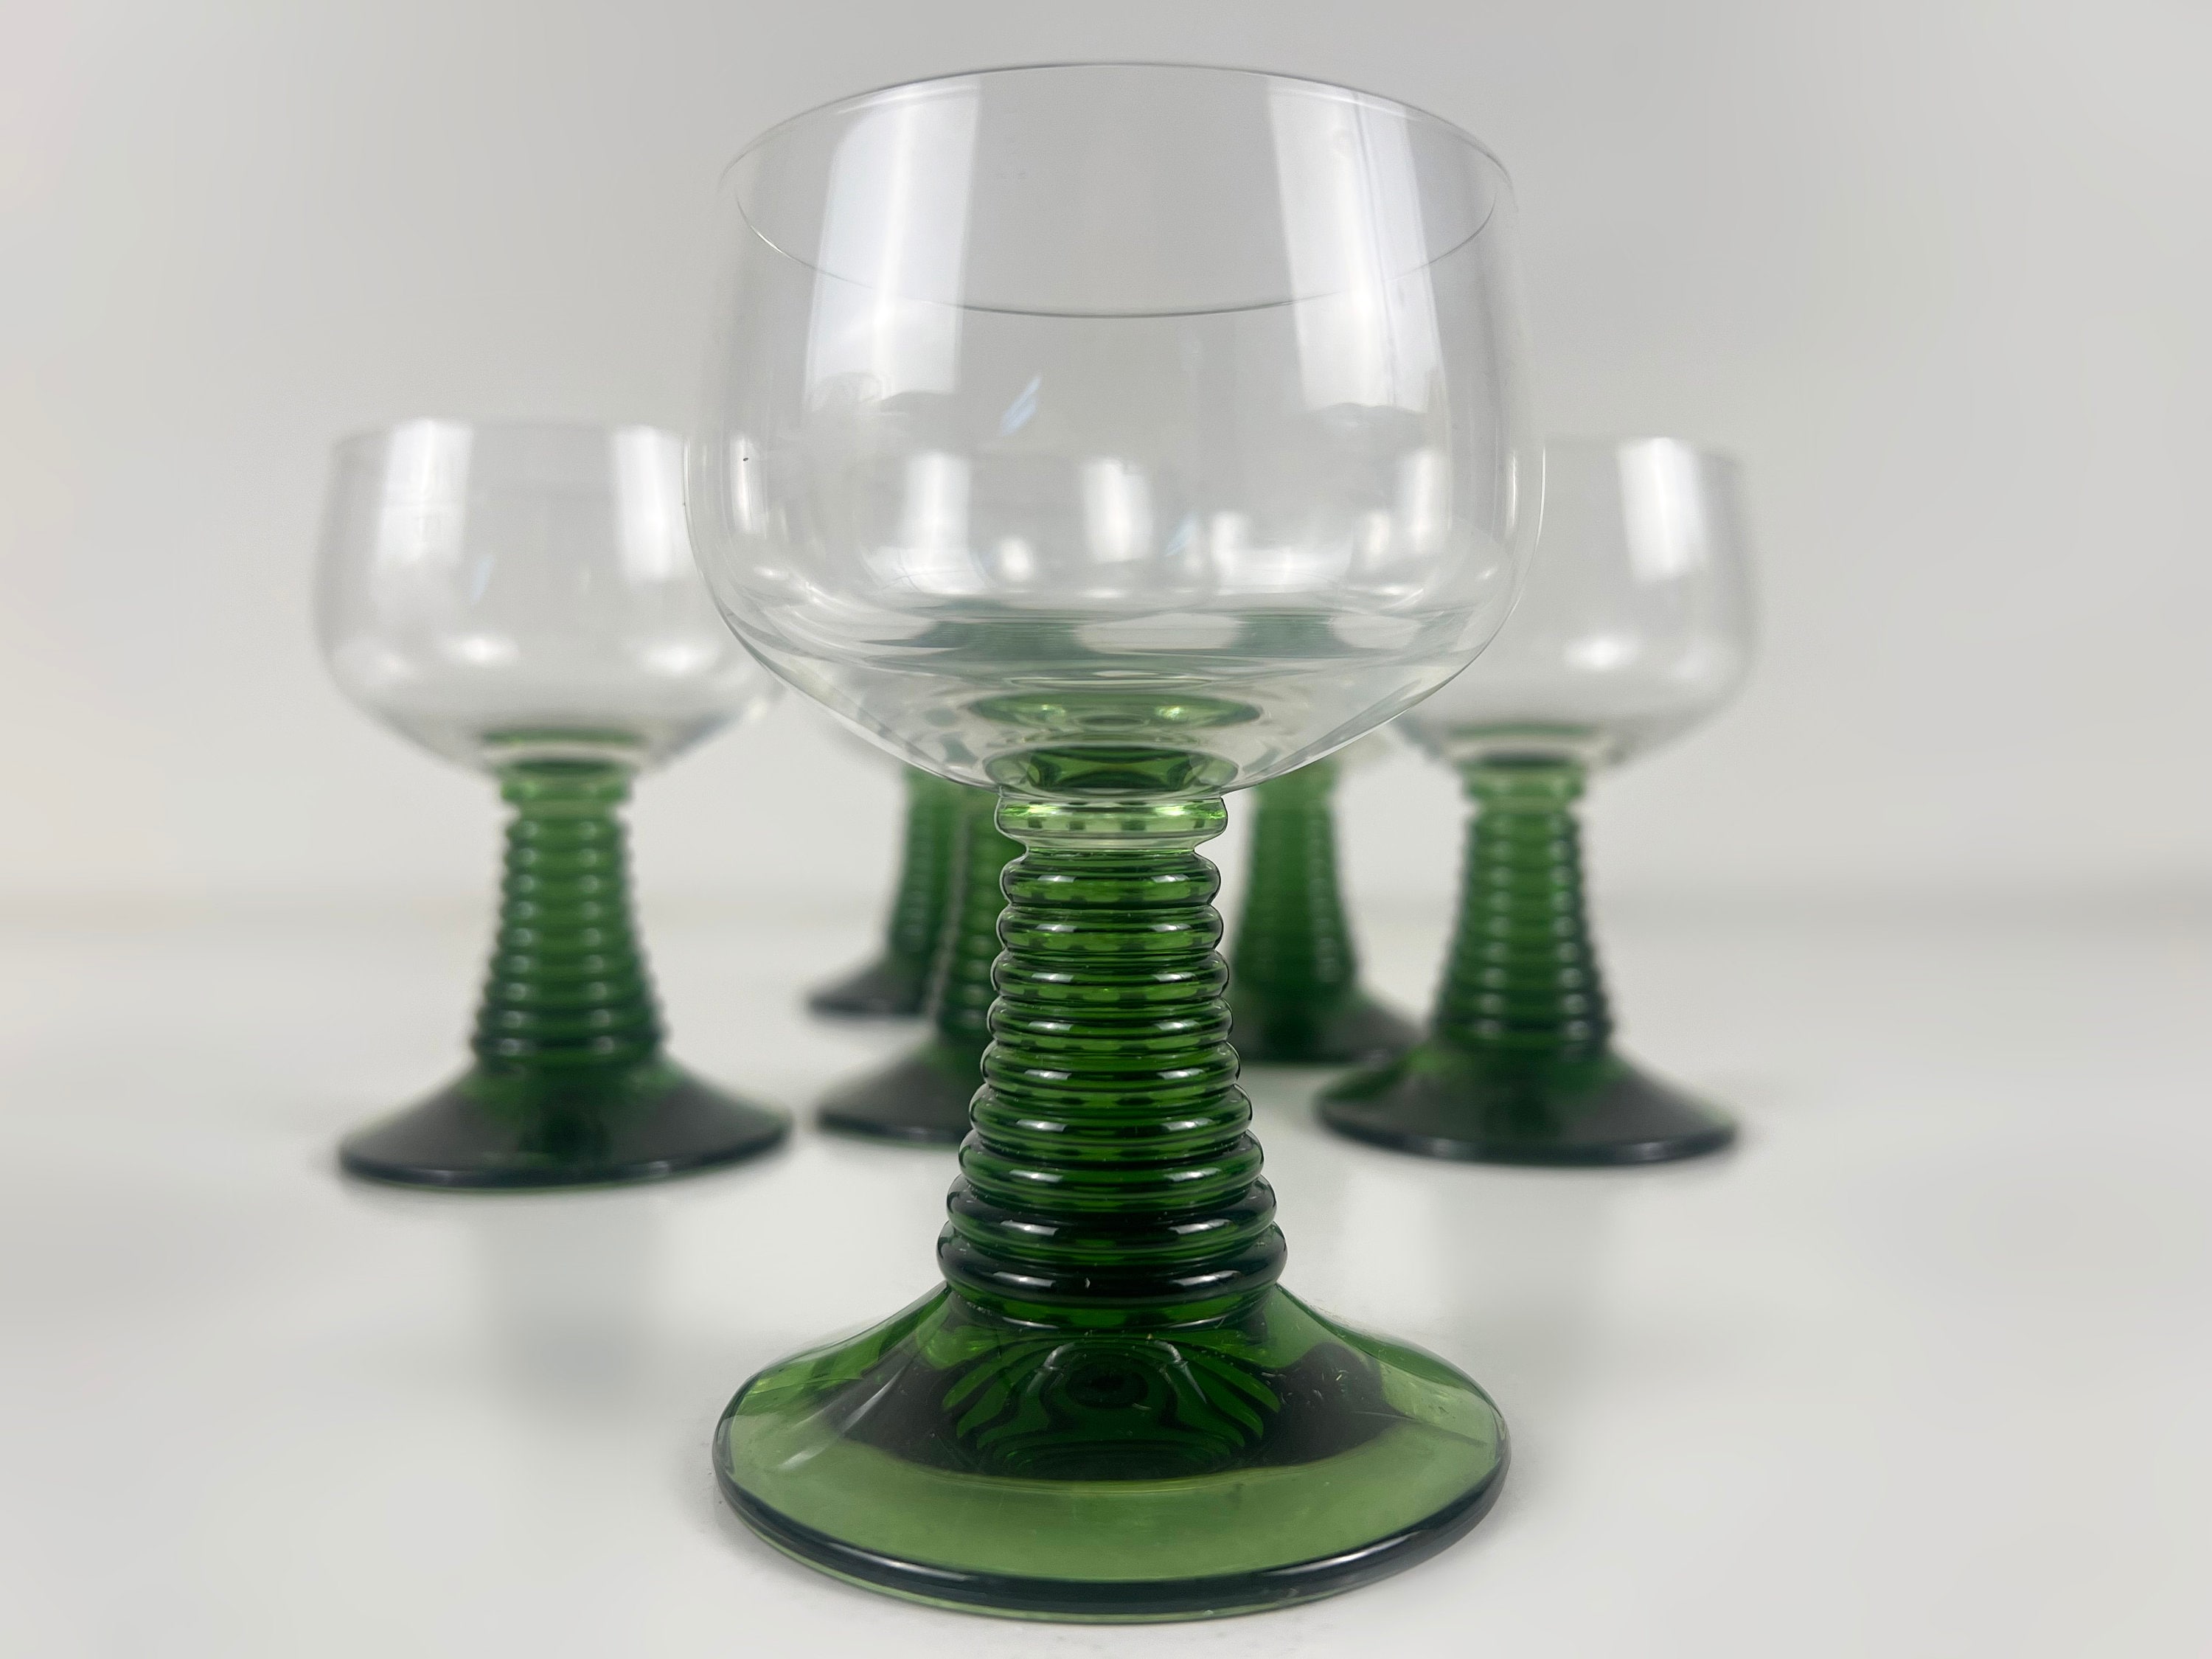 Vintage Olive Green Long Stemmed Wine and Cordial Glasses in Set of 2, –  Urban Nomad NYC